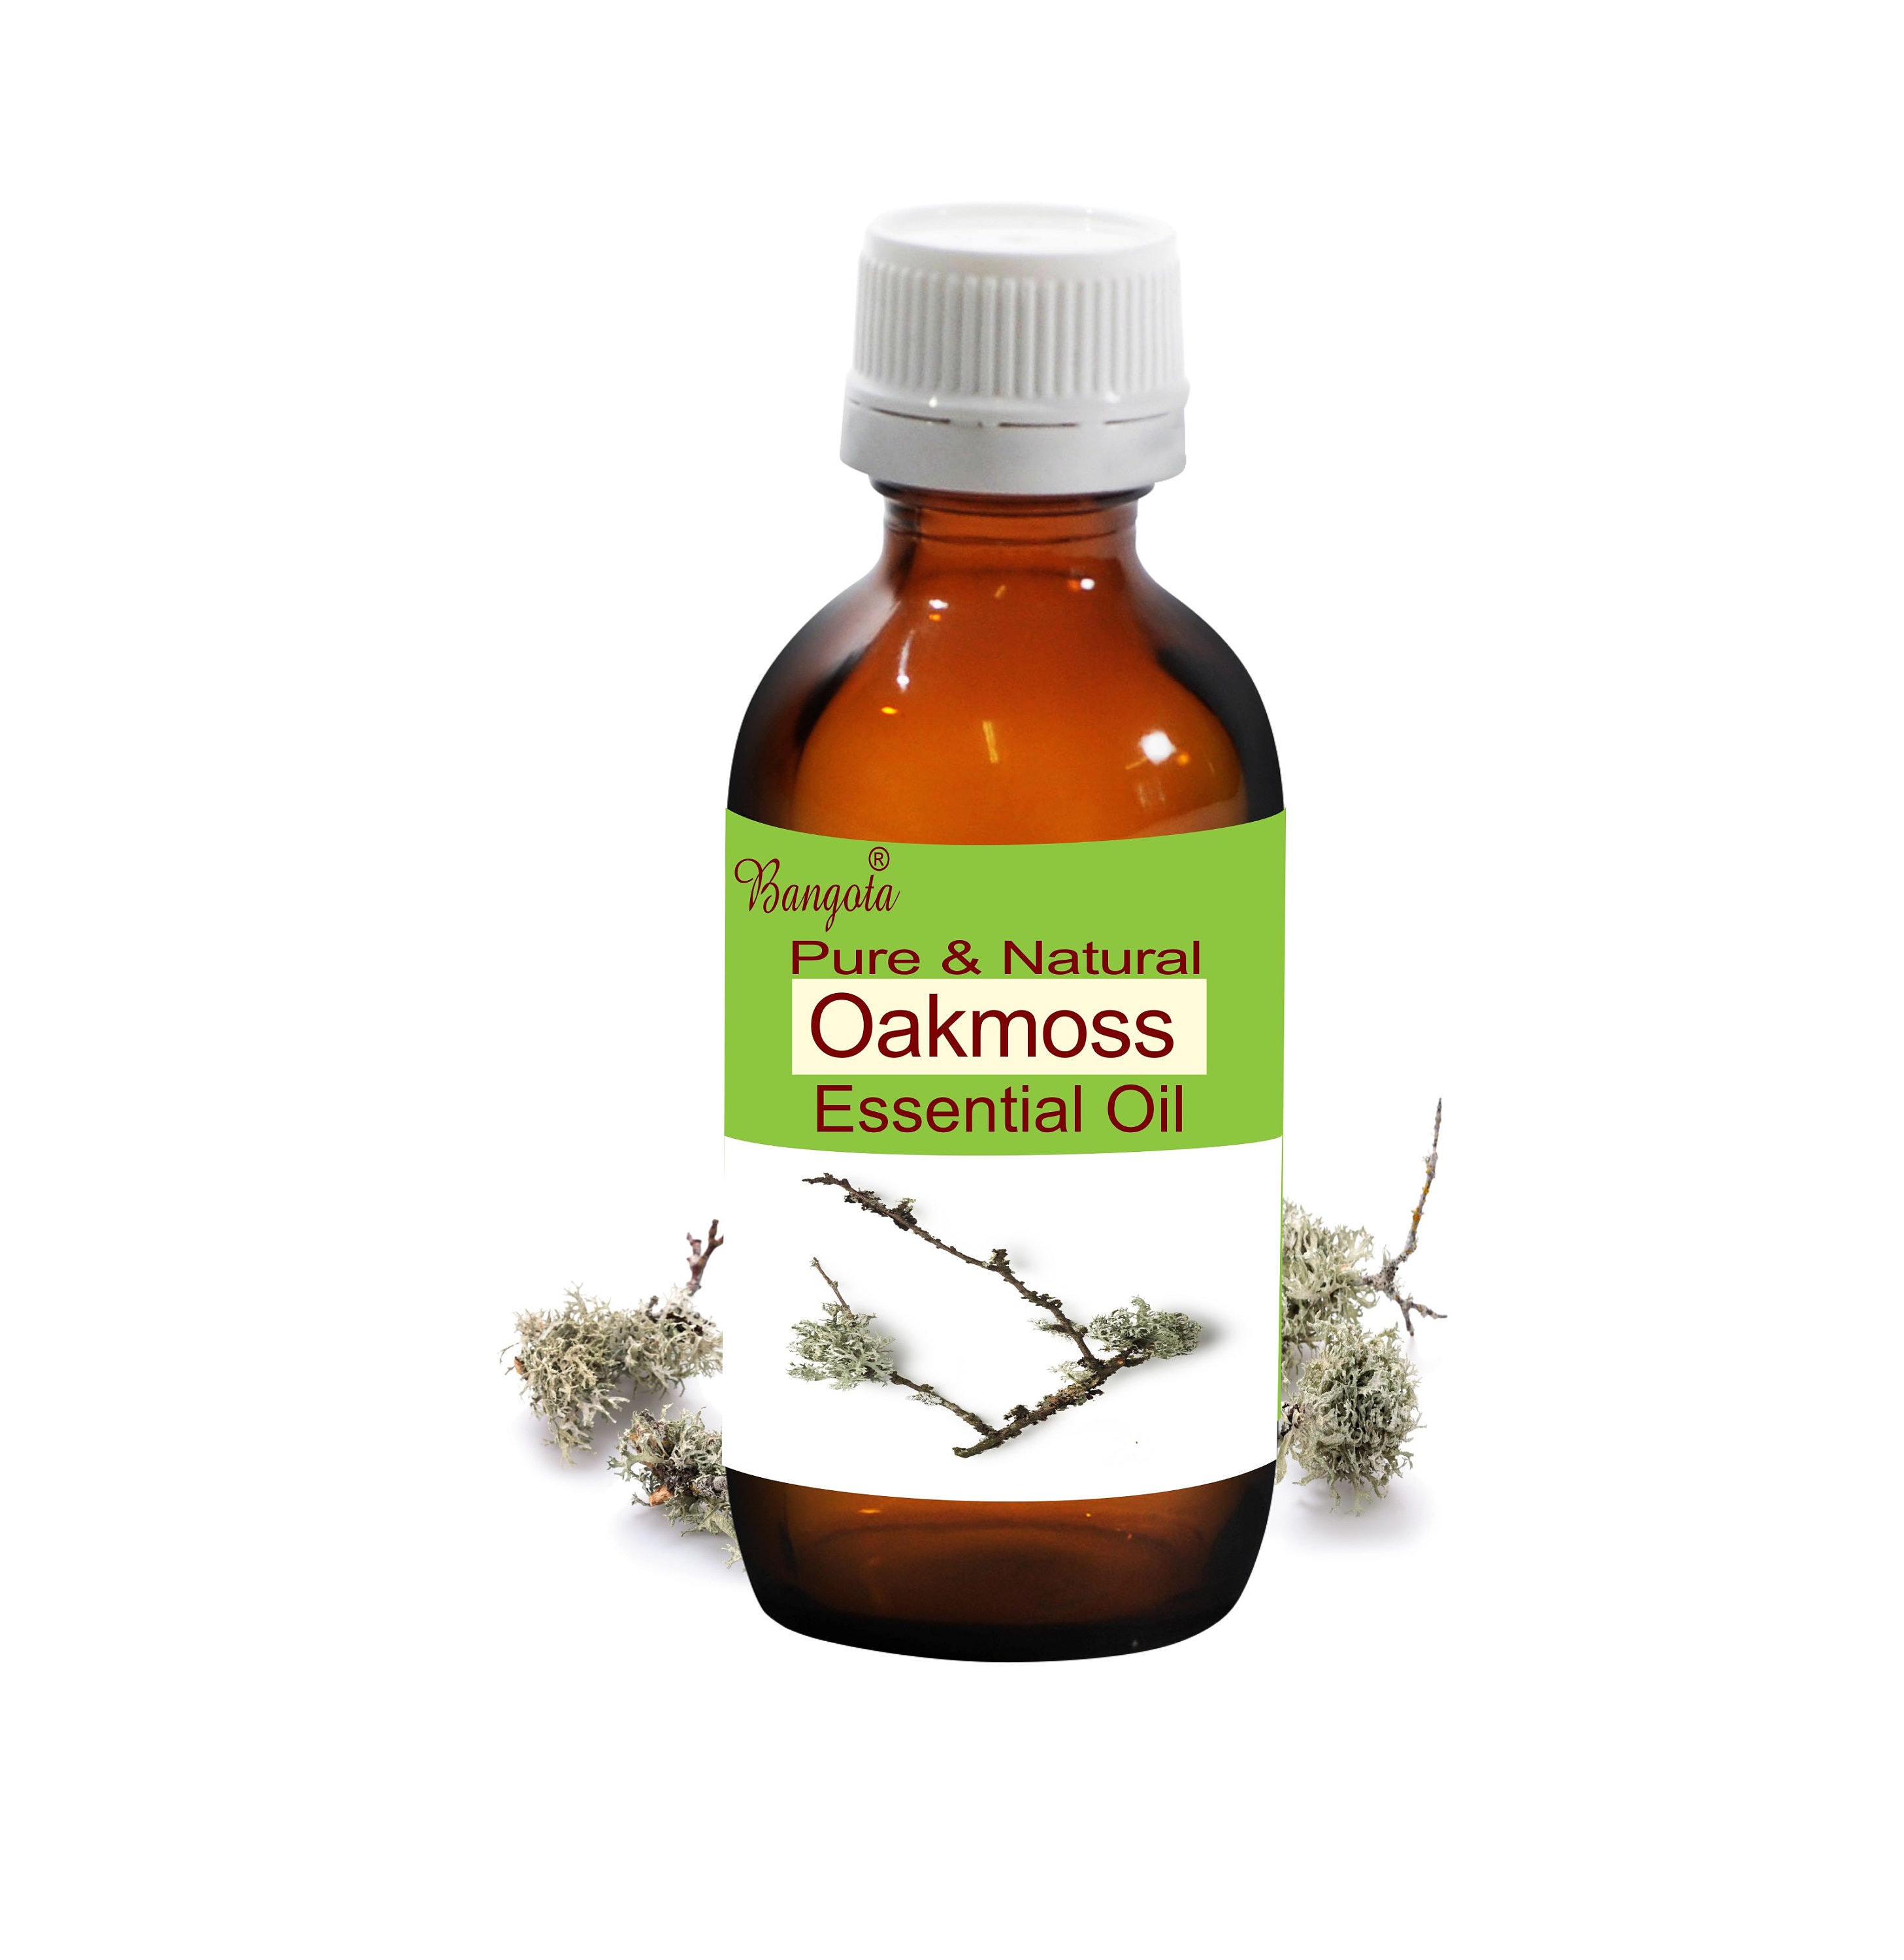 Oakmoss Absolute Essential Oil - 100% PURE NATURAL - Sizes 3 ml to 4 oz